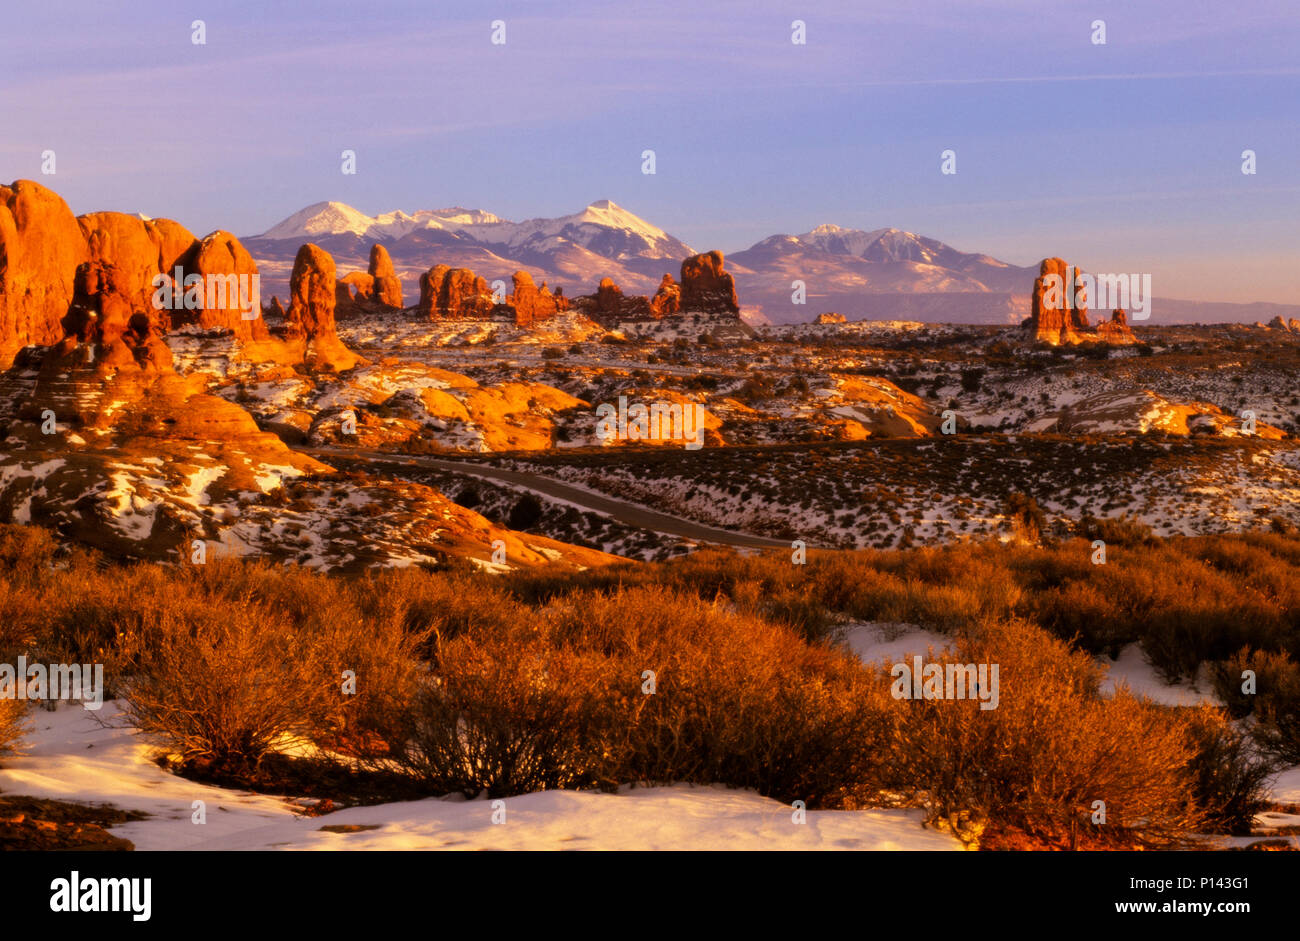 Arches National Park: near Moab, view of distant horizon through rock formations over snow covered desert in late light, Utah, USA Stock Photo